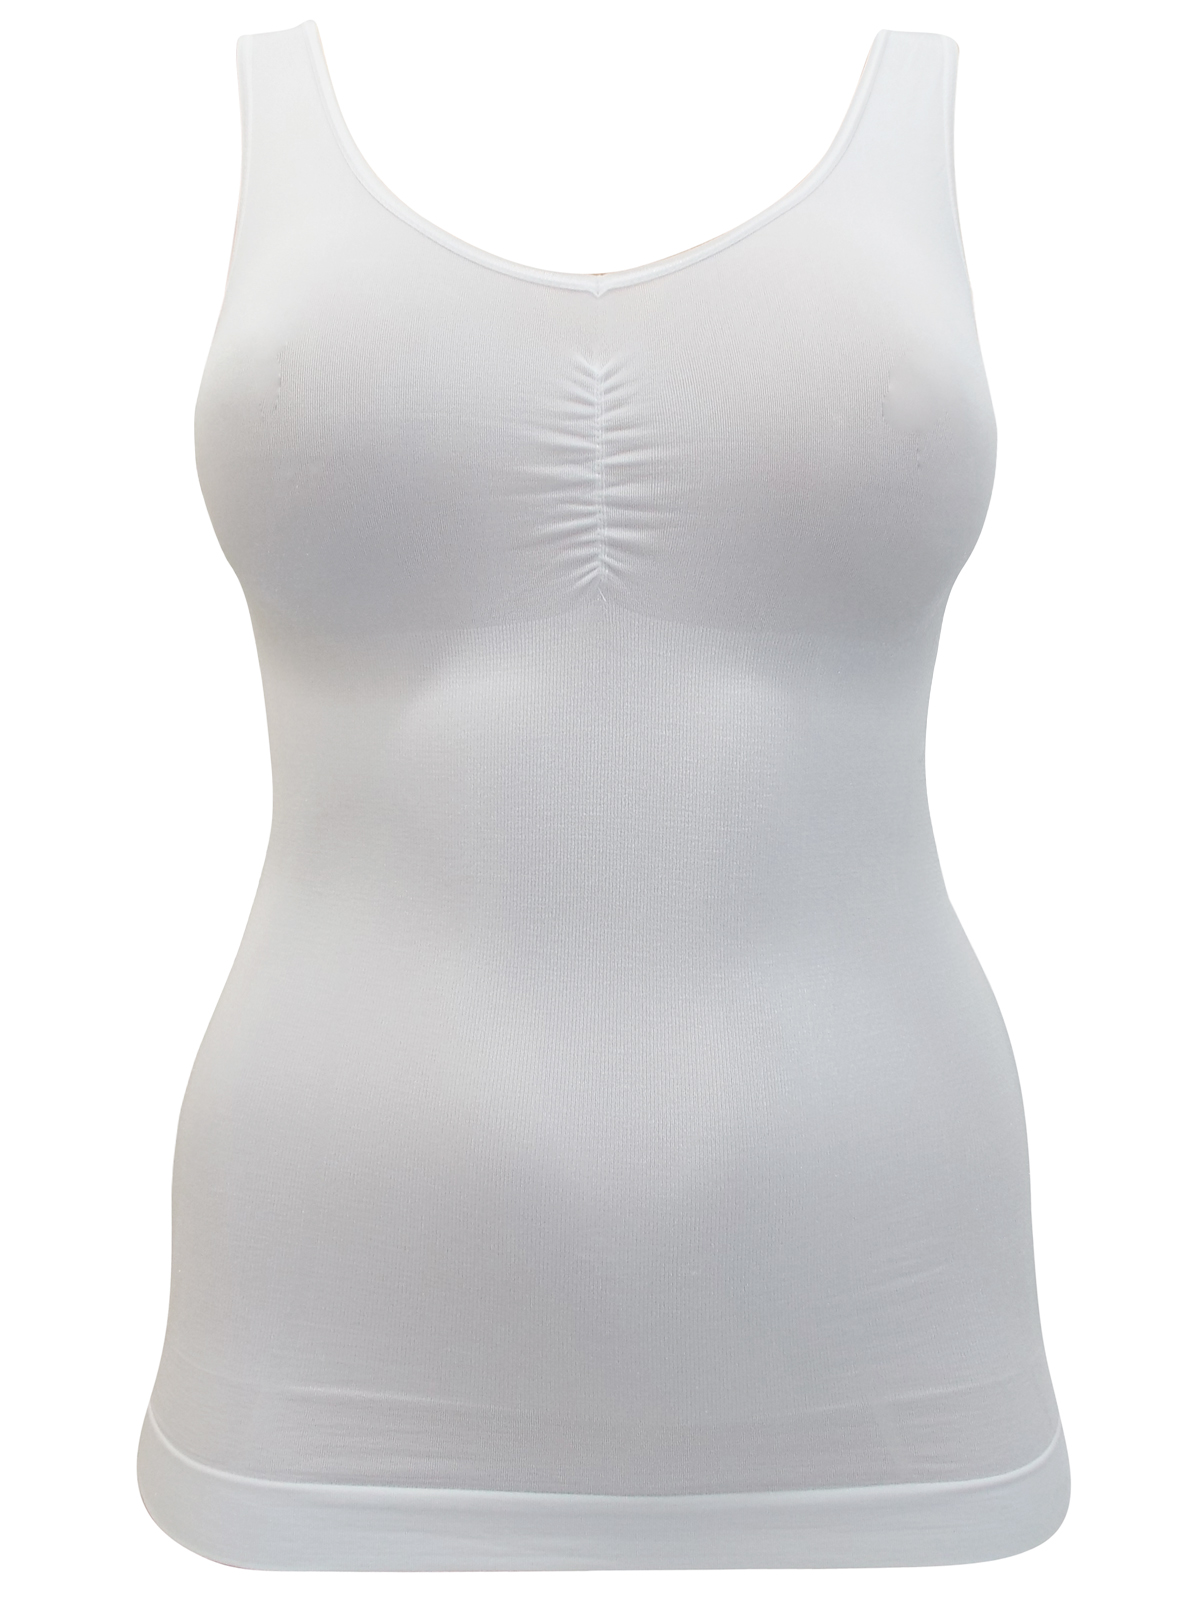 MS Mode - - MS Mode WHITE Body Shaping Vest Top - Size 14/16 to 26/28 ...